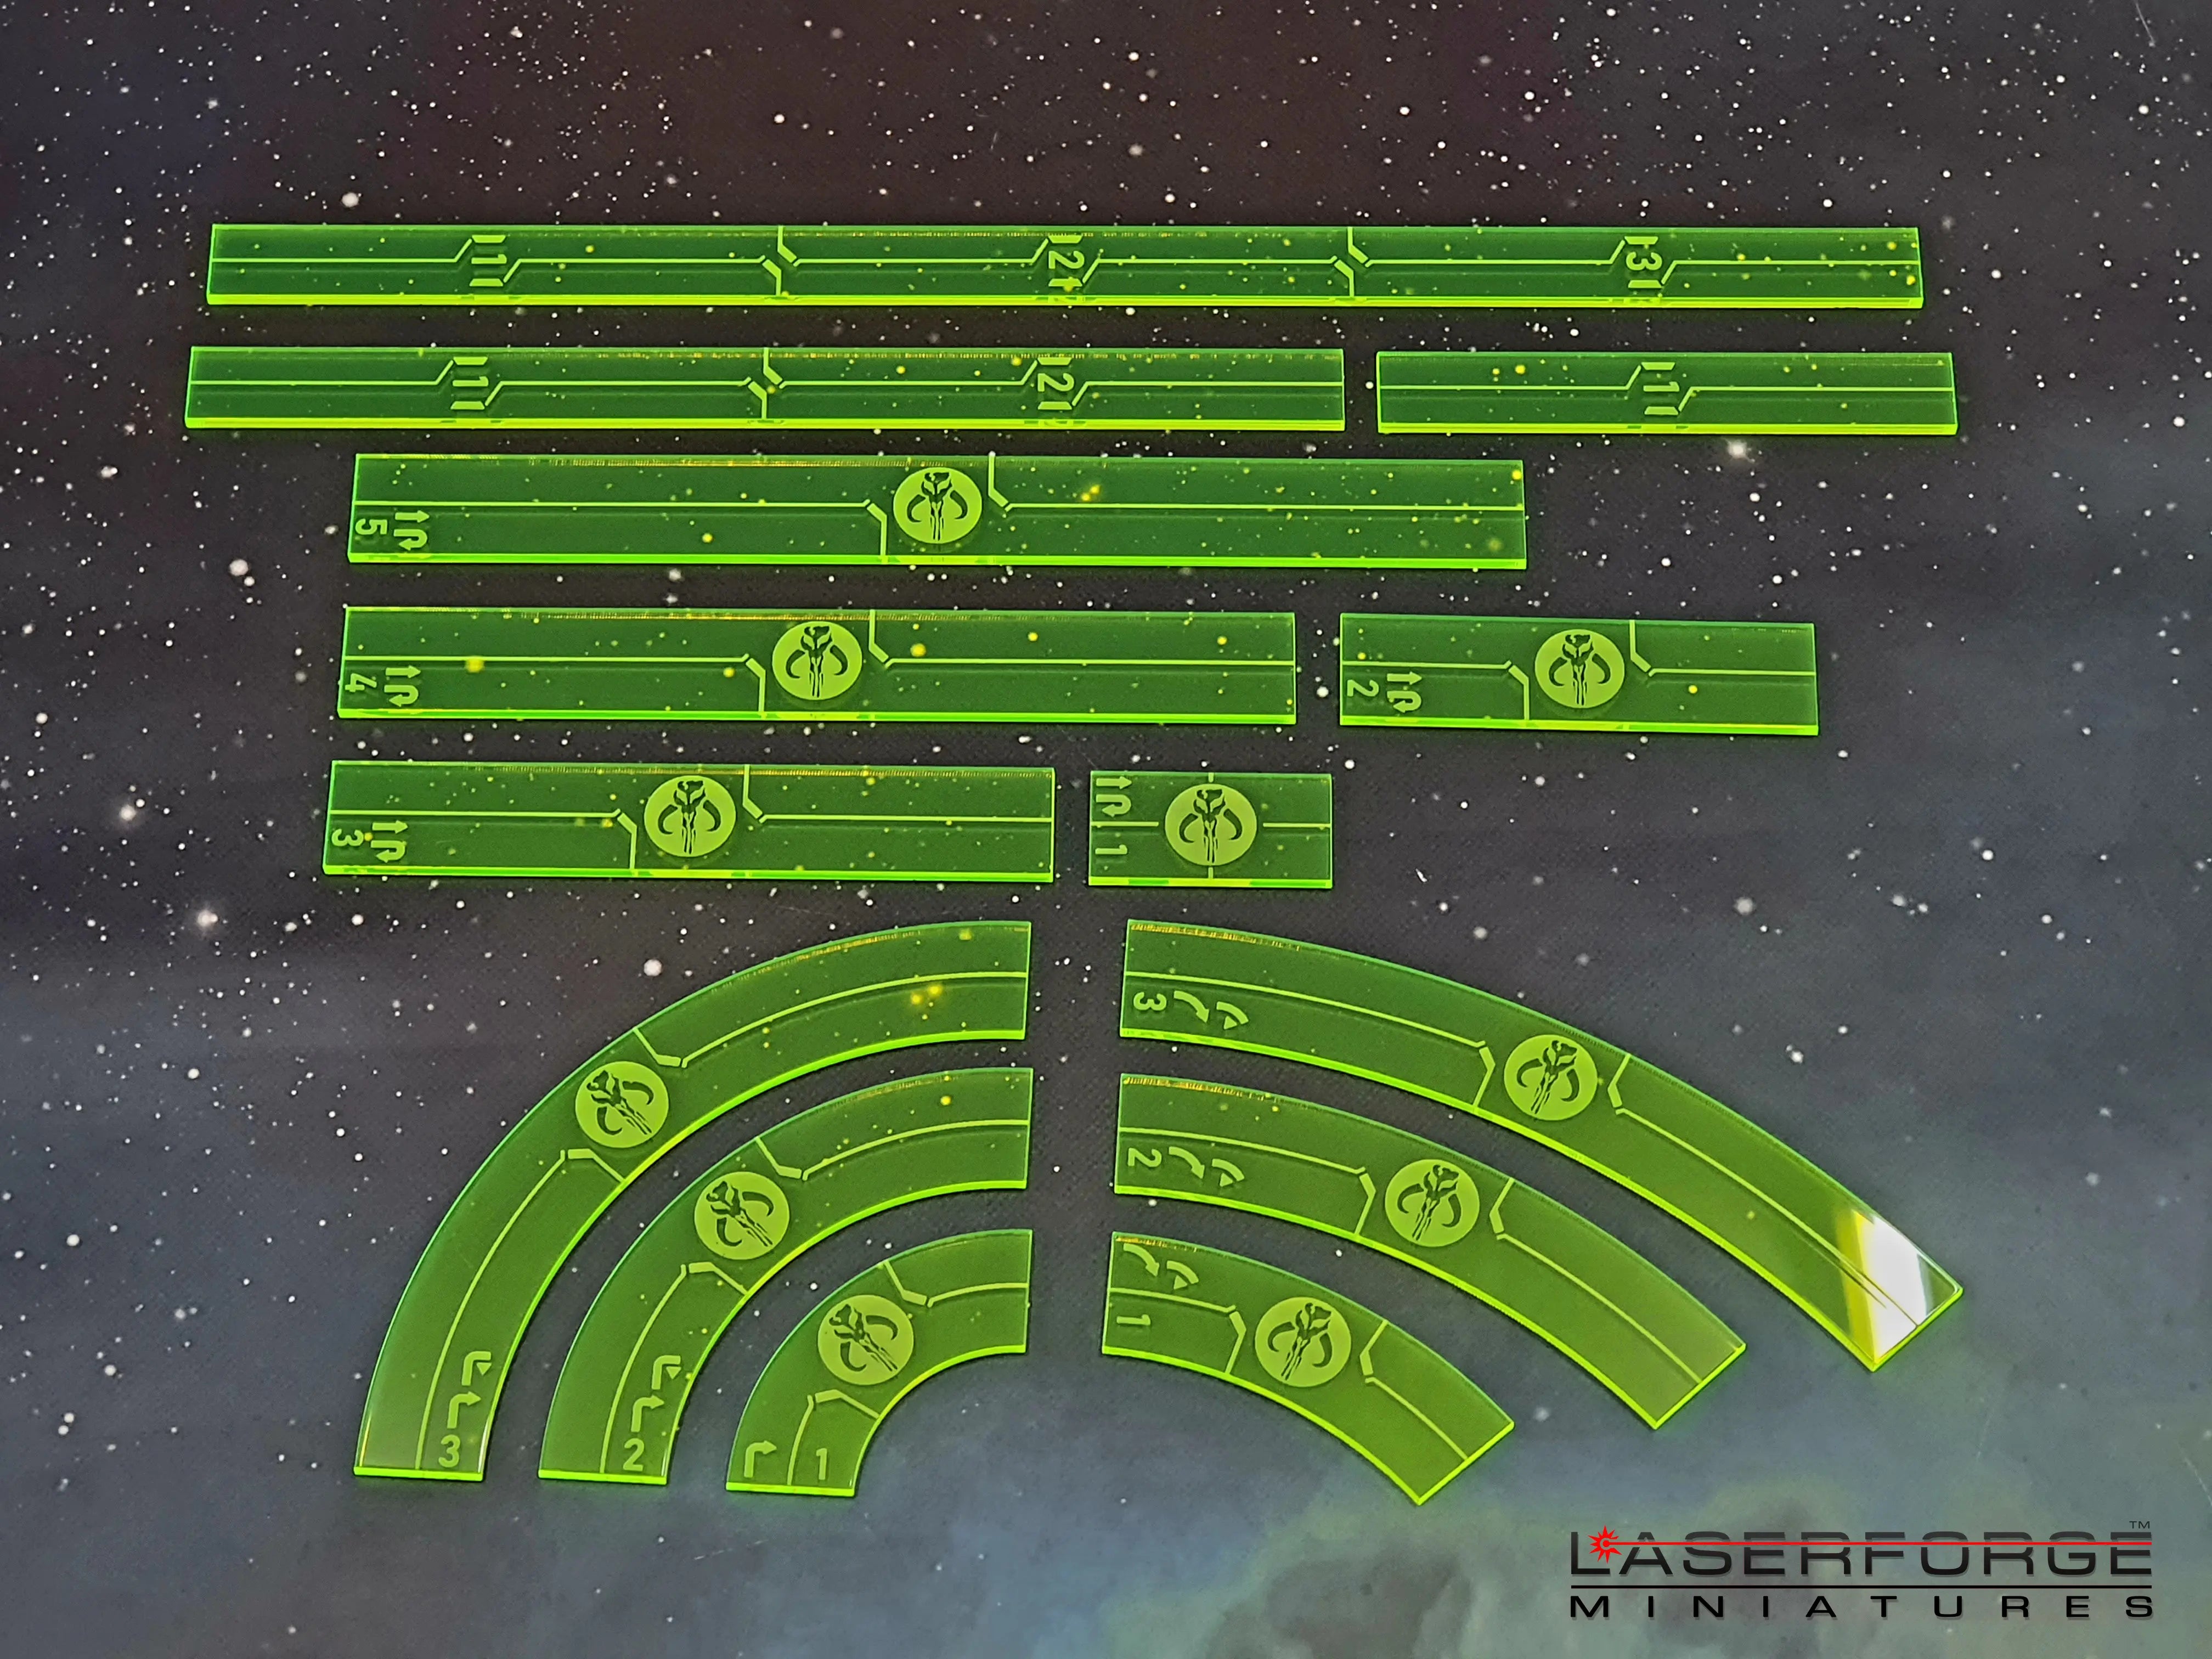 Movement Template Set - Compatible with Star Wars XWing v2.5 Laserforge Miniatures